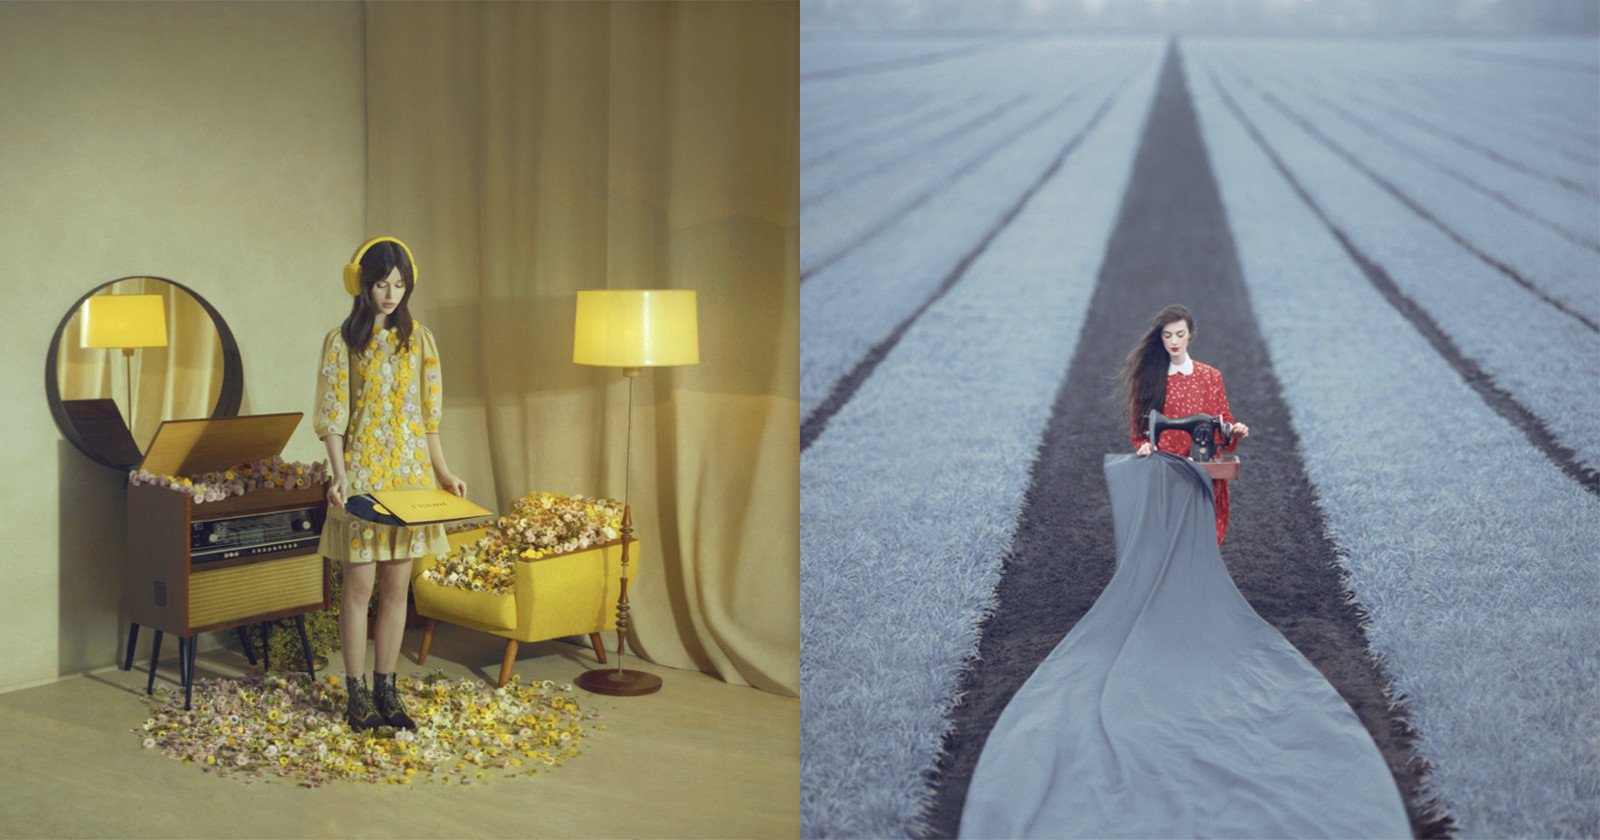  photographer surreal look like snapshots out dreams 